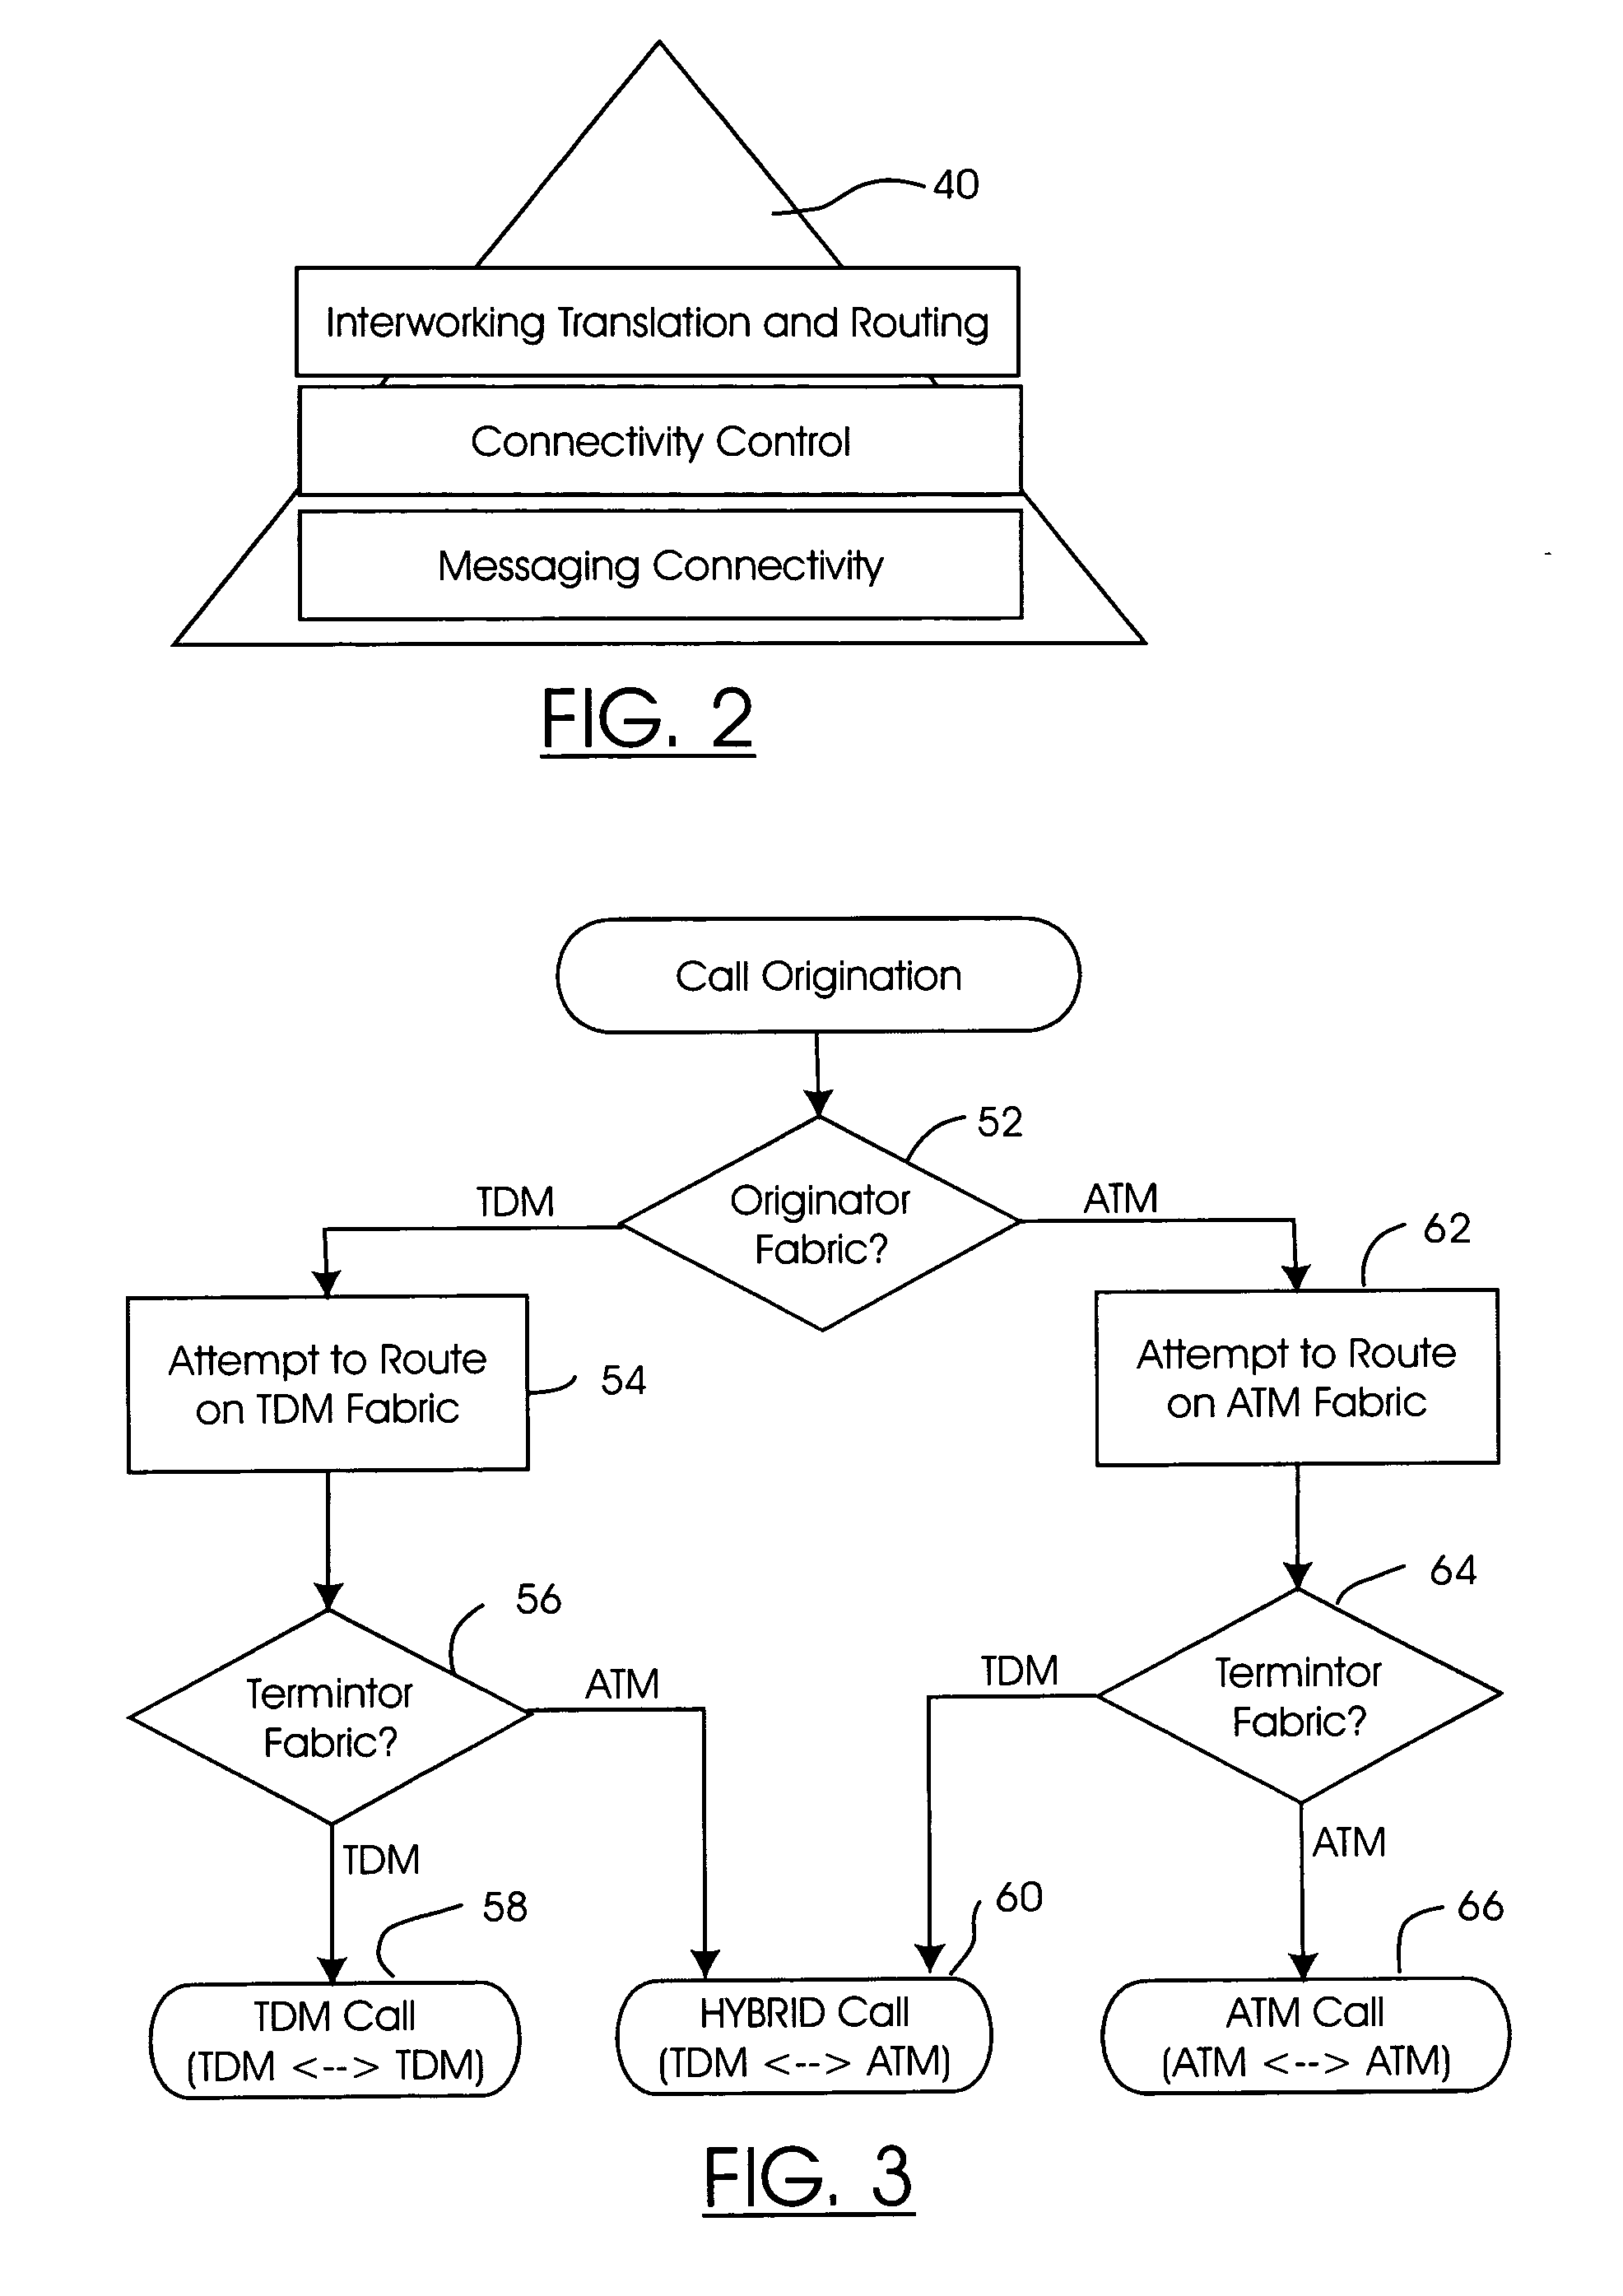 Hybrid TDM and ATM voice switching central office and method of completing inter-office calls using same